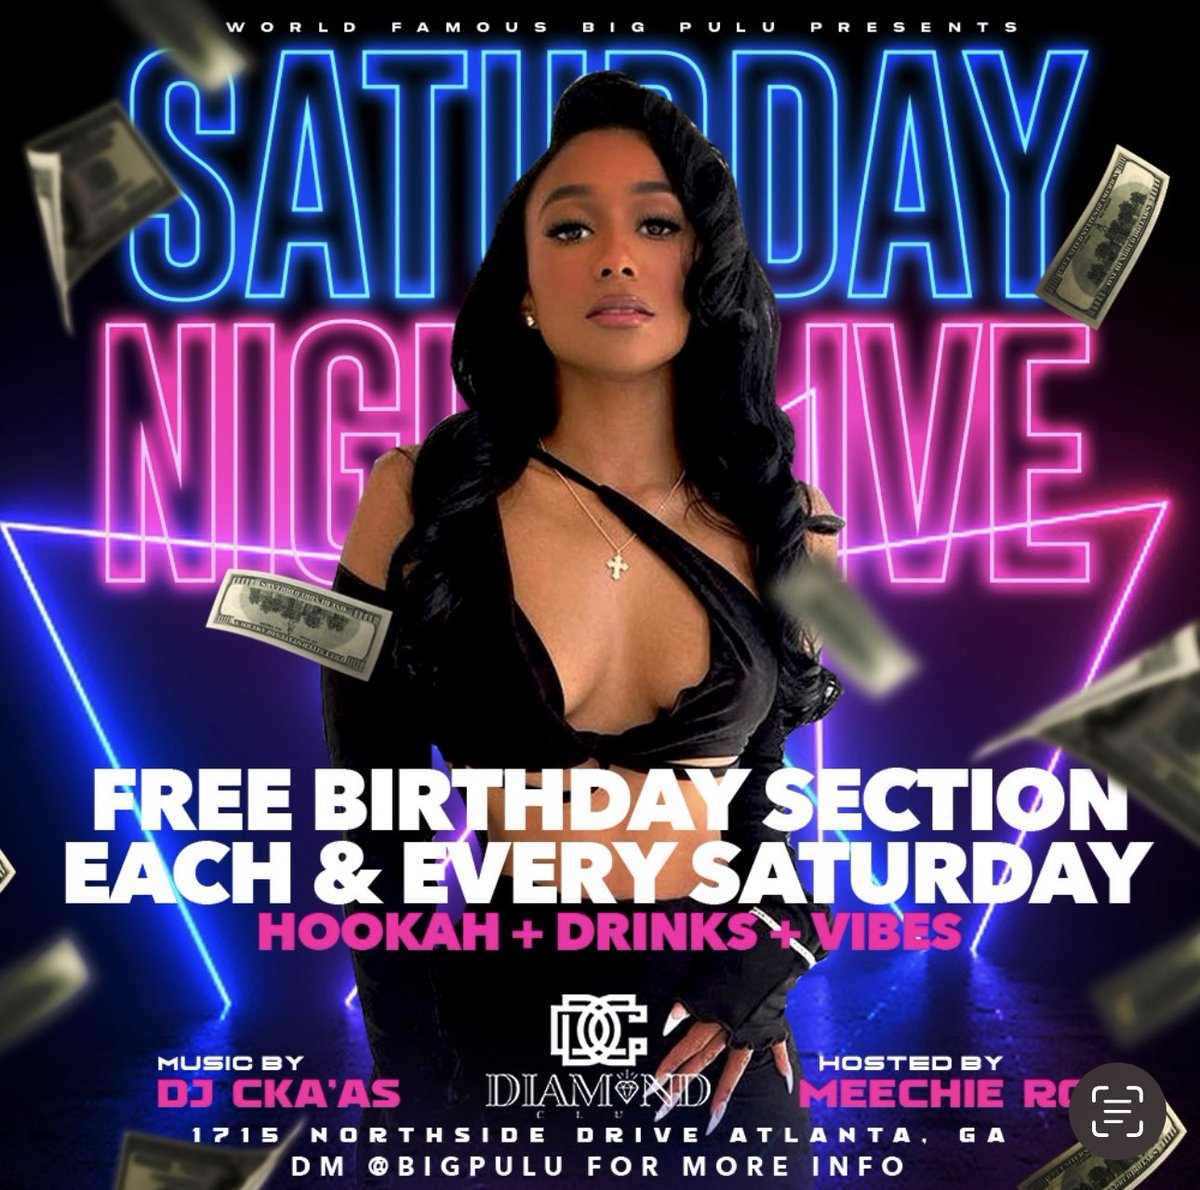 SATURDAY NIGHT LIVE AT THE WORLD FAMOUS DIAMOND CLUB 1715 NORTHSIDE DR